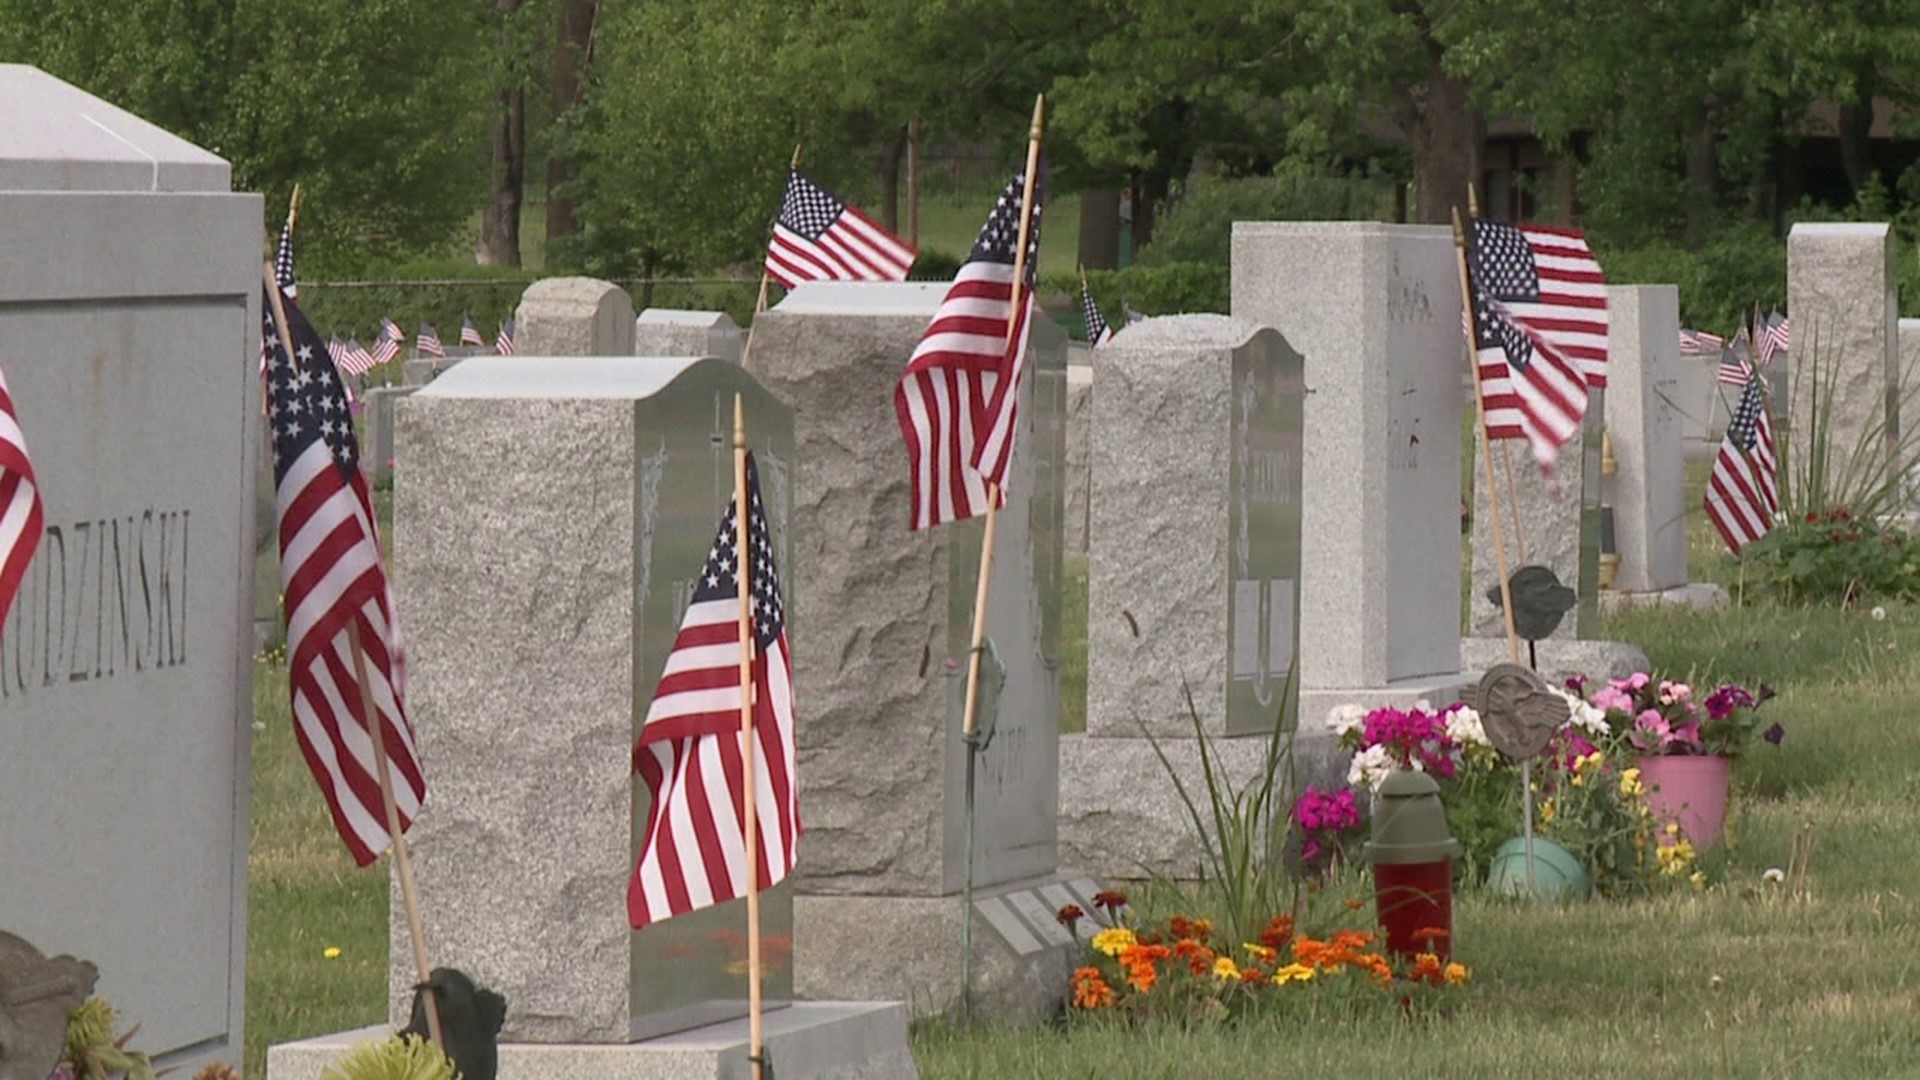 Mike Stevens shares the meaning of Memorial Day in this trip Back Down the Pennsylvania Road.